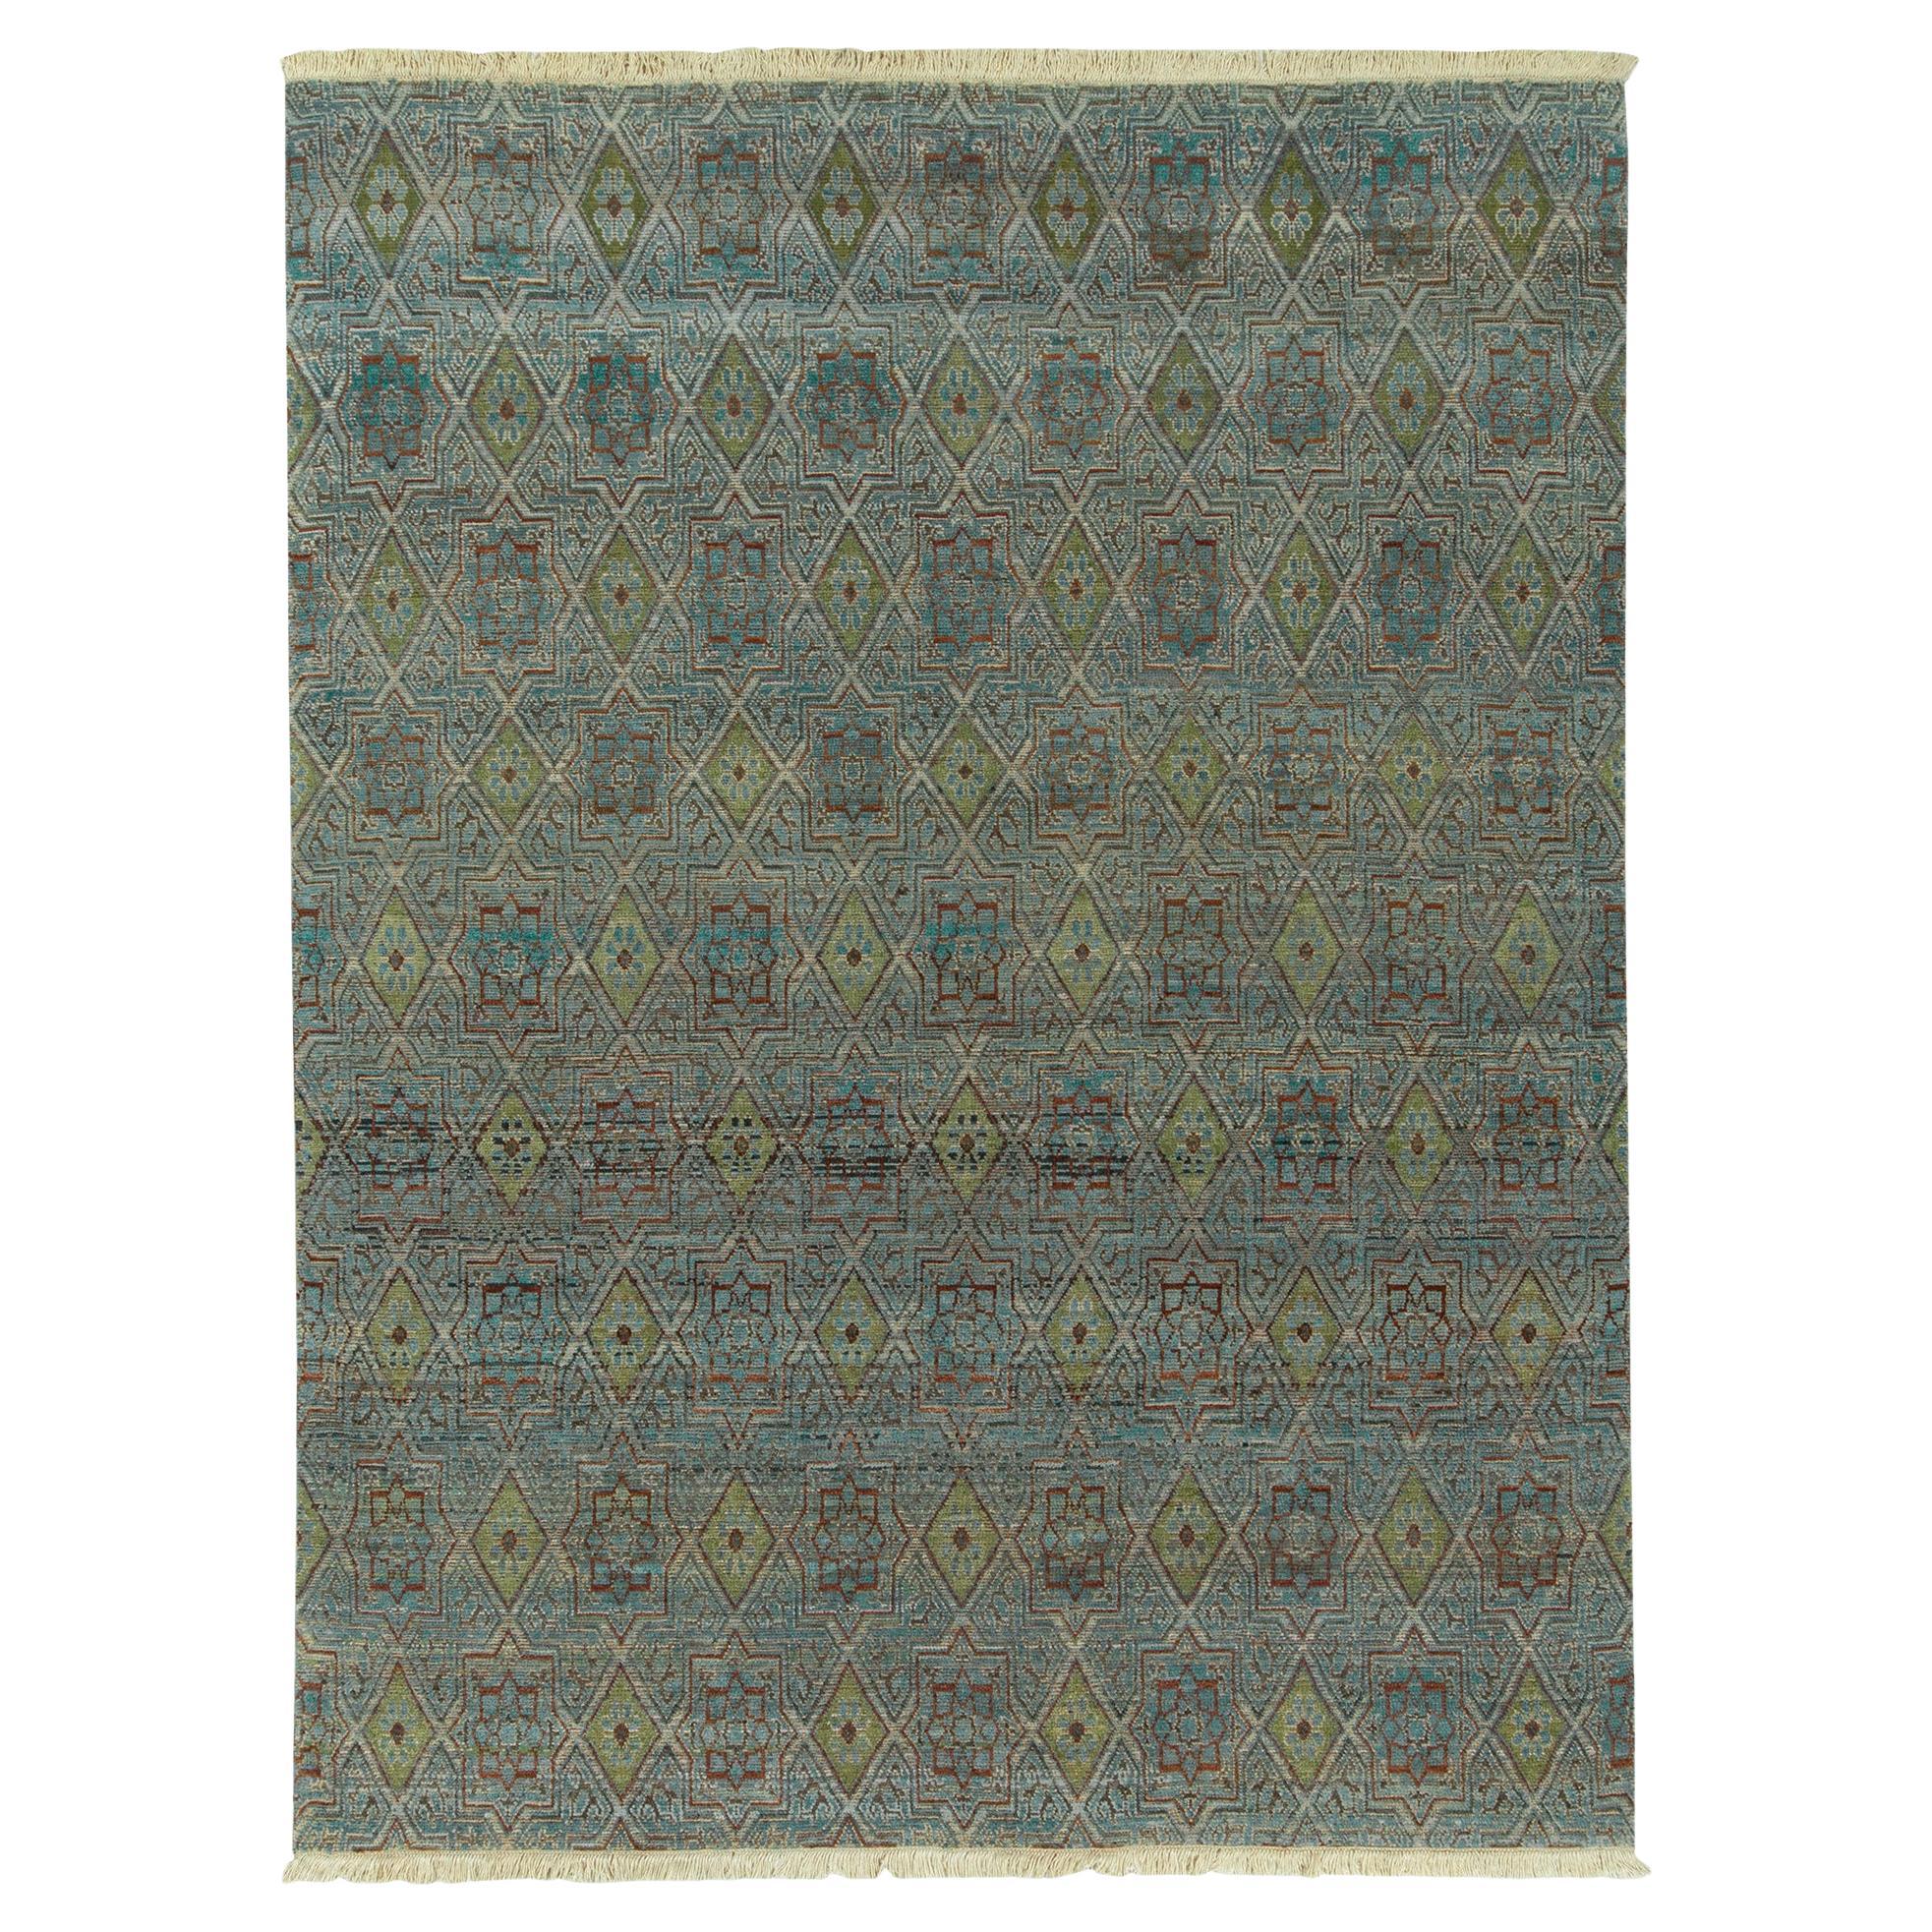 Rug & Kilim’s Hand-Knotted Floral Rug in Blue, Green Geometric Pattern